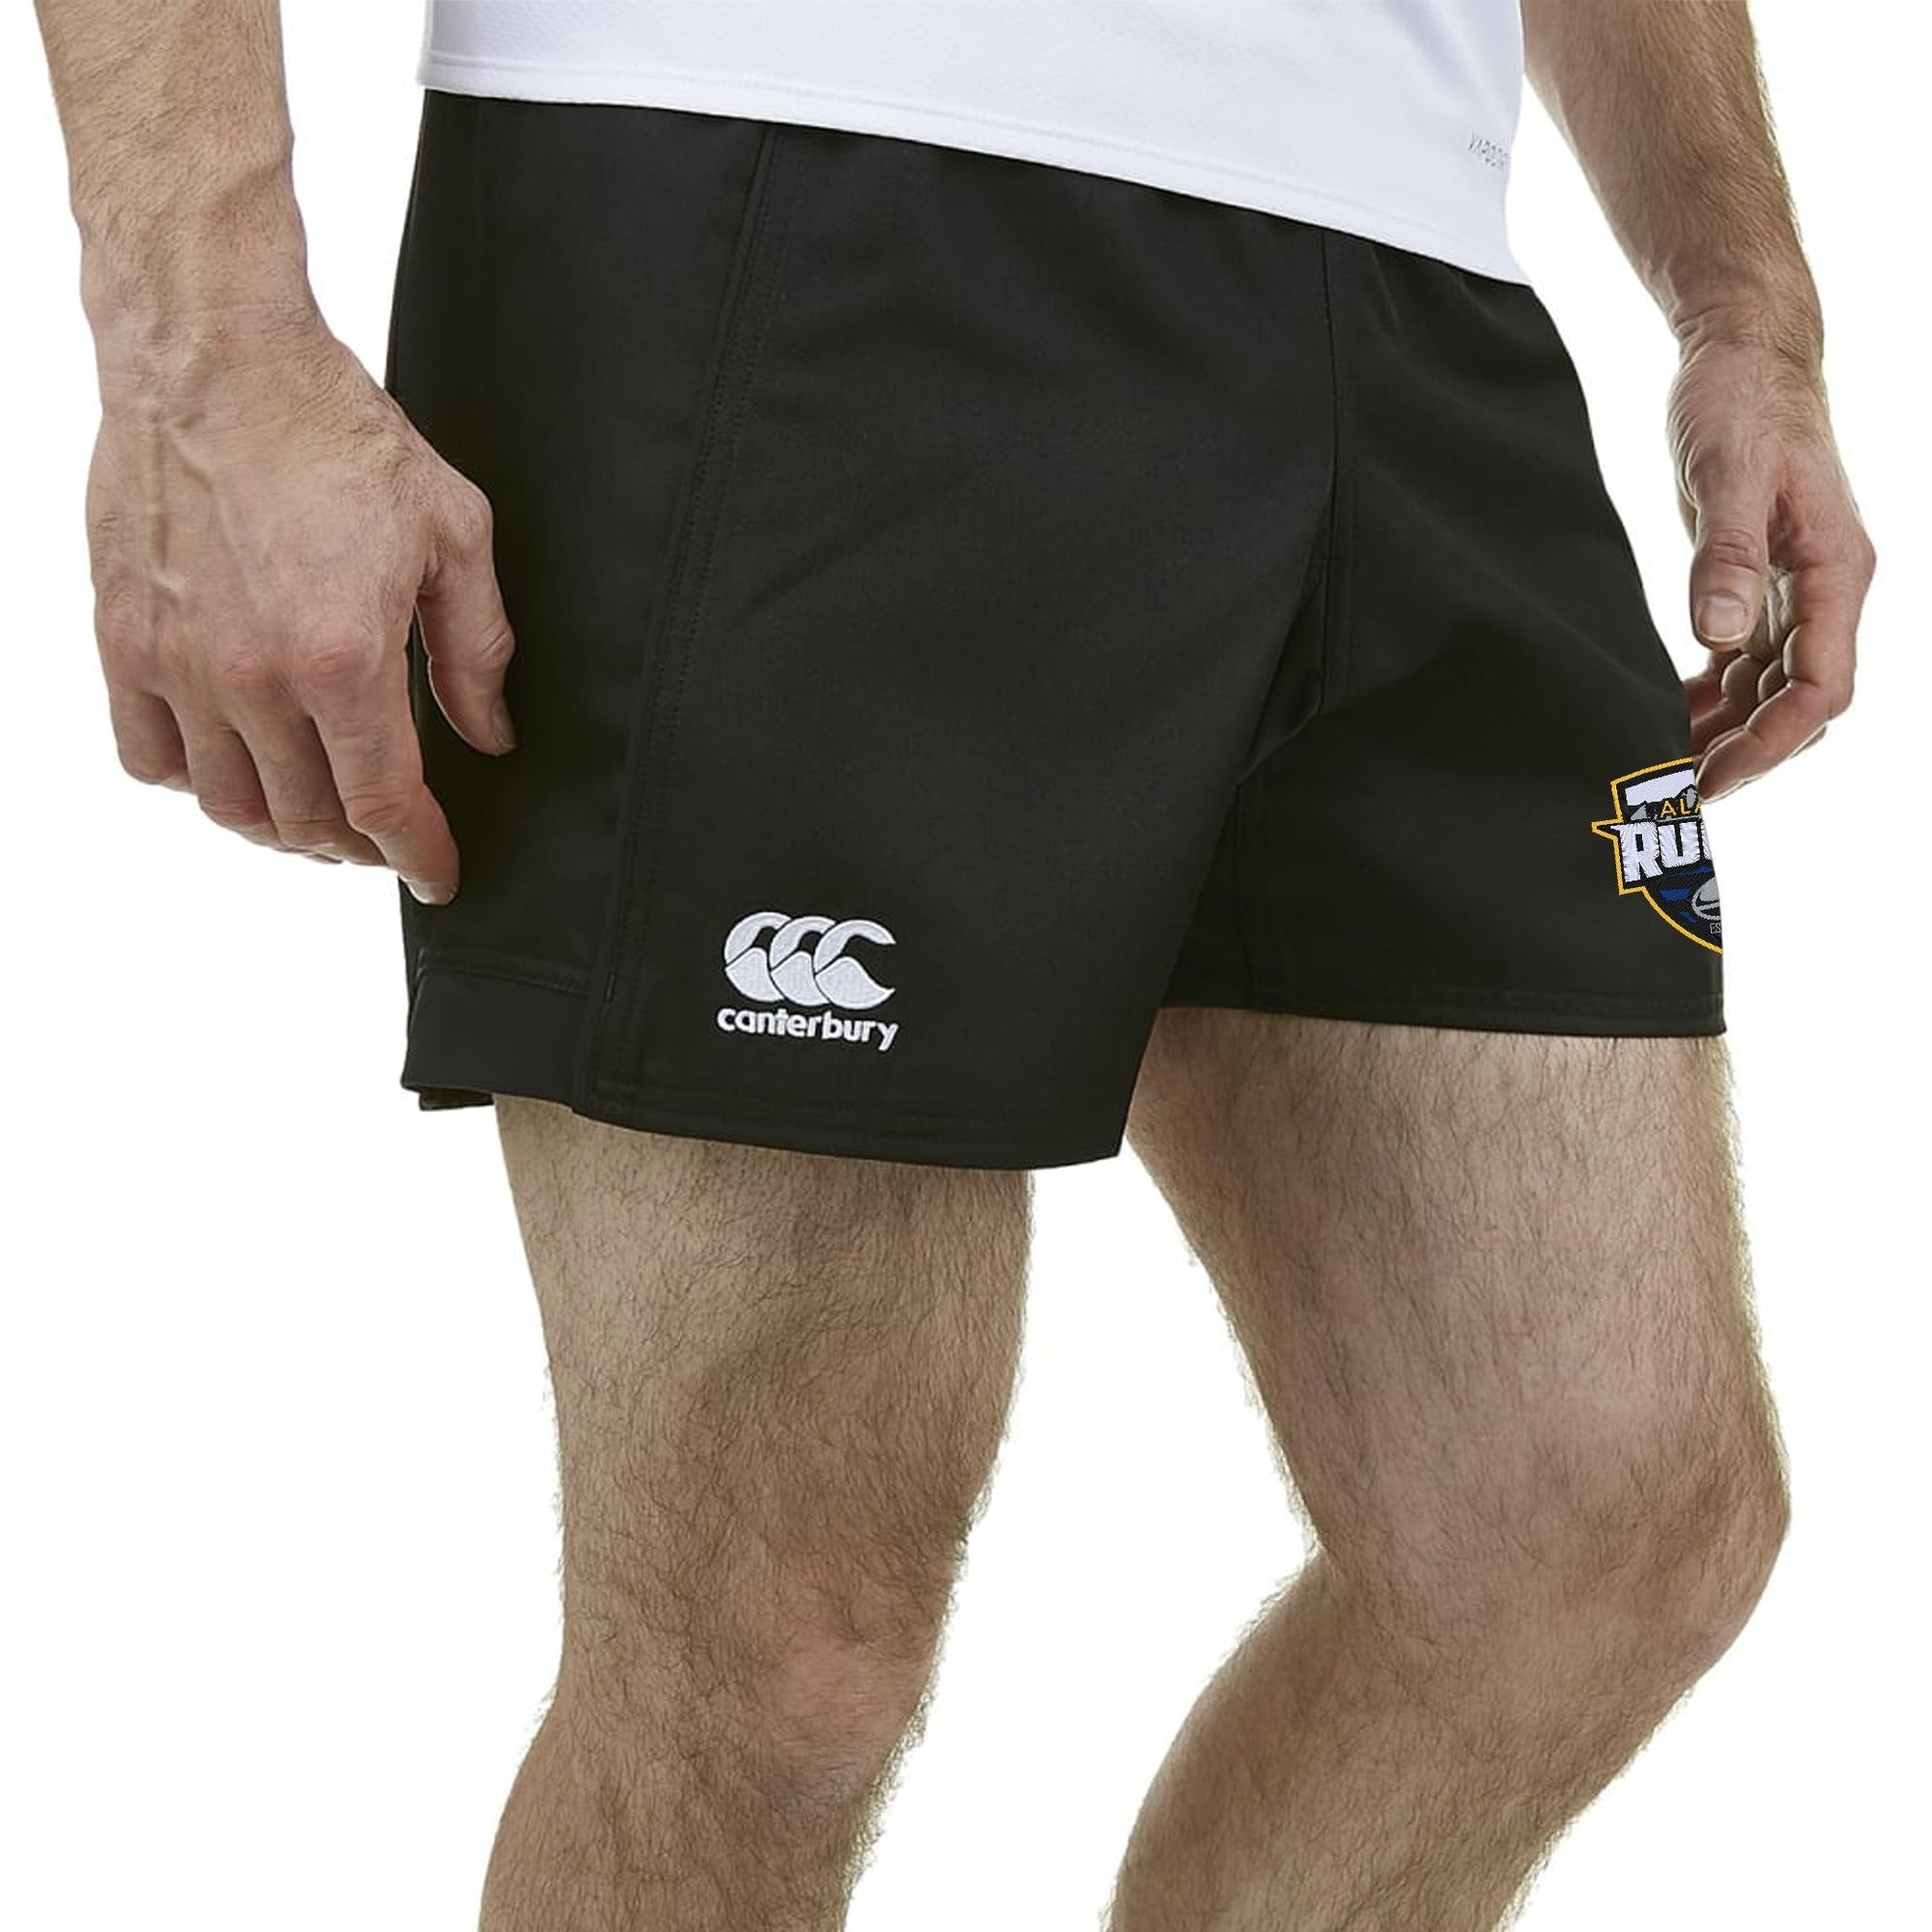 Rugby Imports Alaska Rugby CCC Advantage Rugby Short